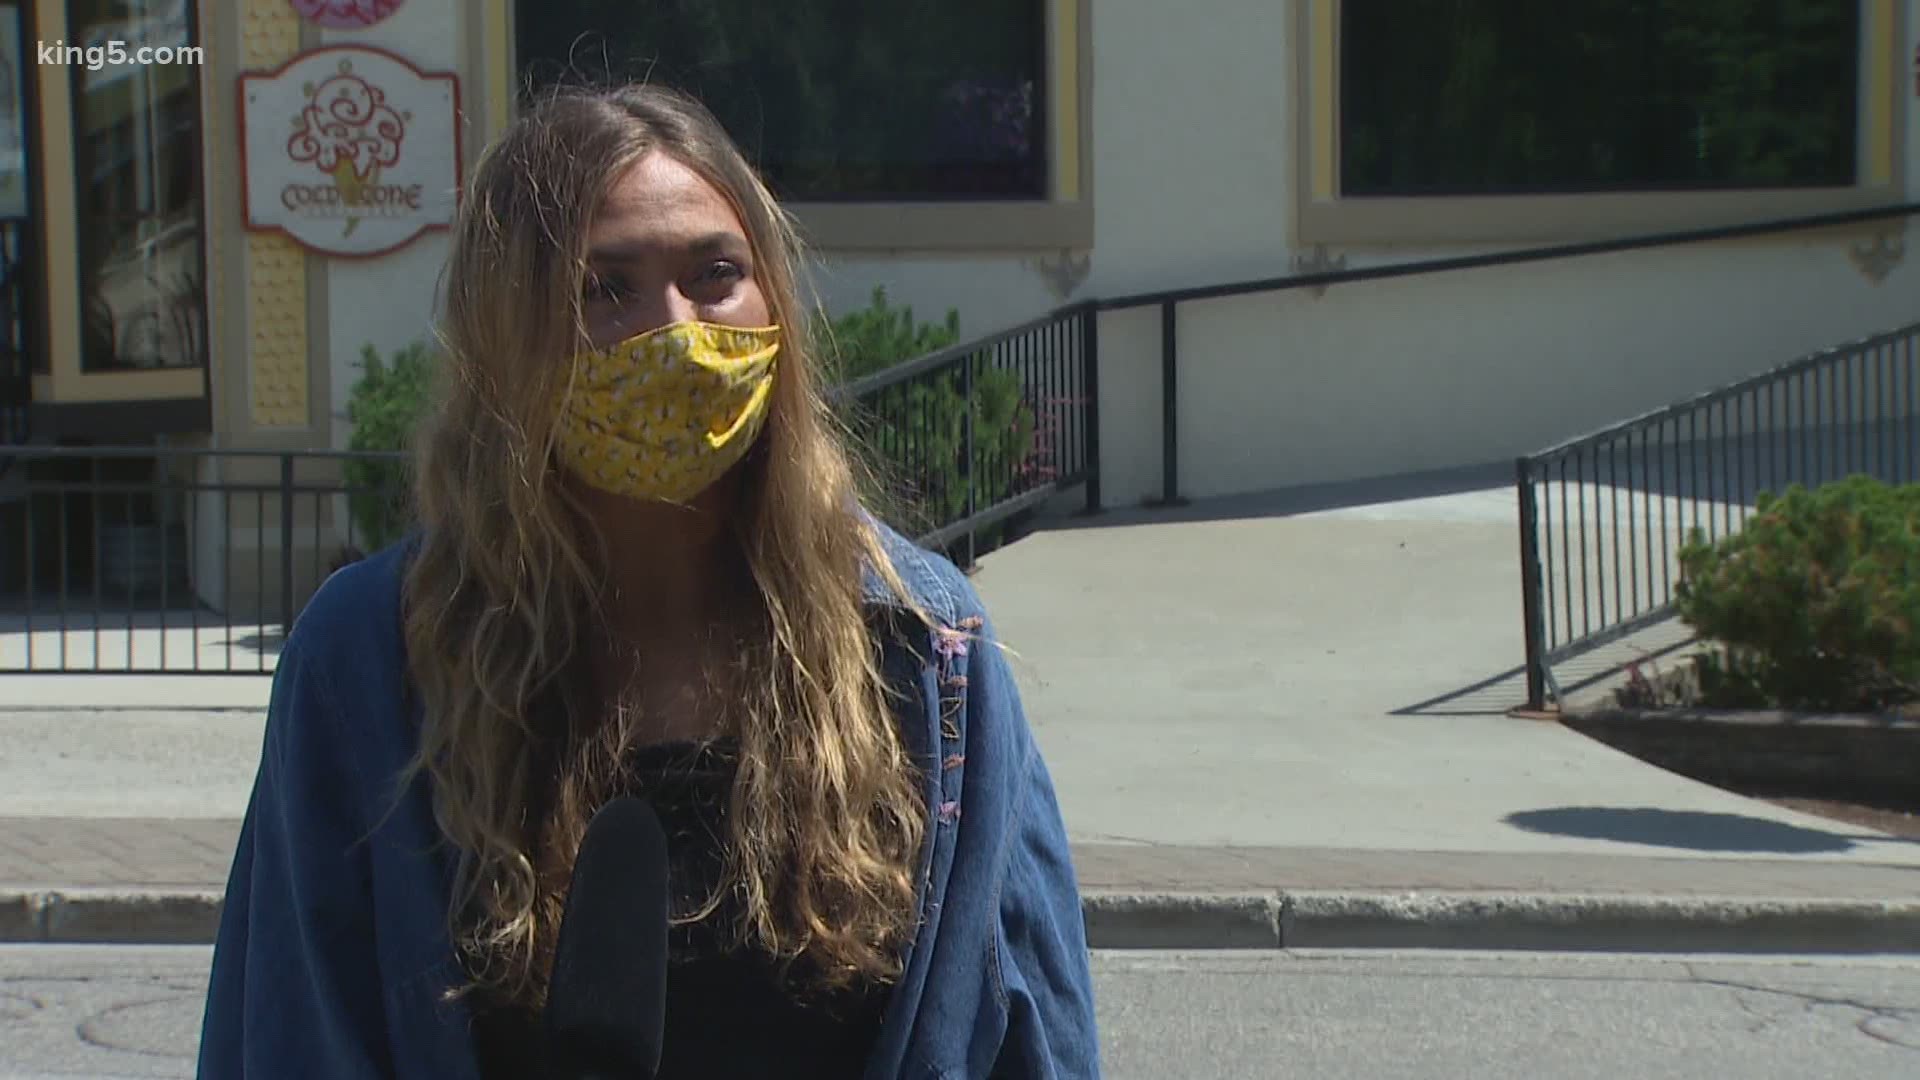 After a teenage girl tried coming into Cold Stone Creamery in Leavenworth without a face mask and was refused service, the girl's mother had it out with an employee.